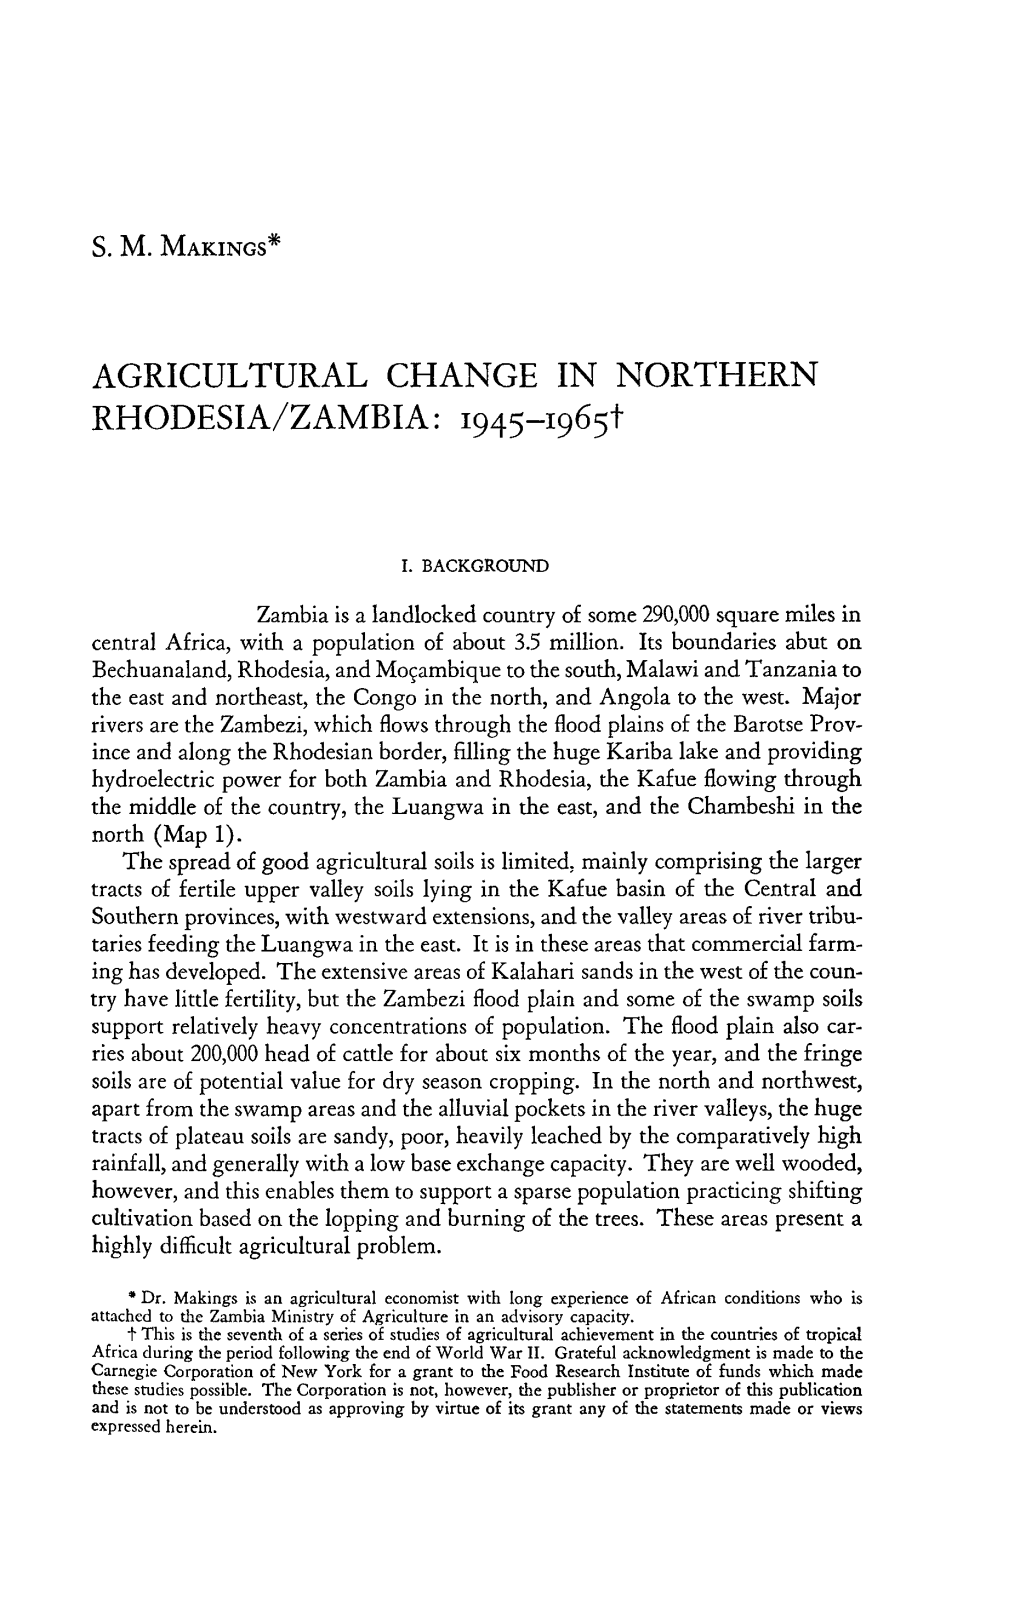 AGRICULTURAL CHANGE in NORTHERN RHODESIA/ZAMBIA: 1945-196St